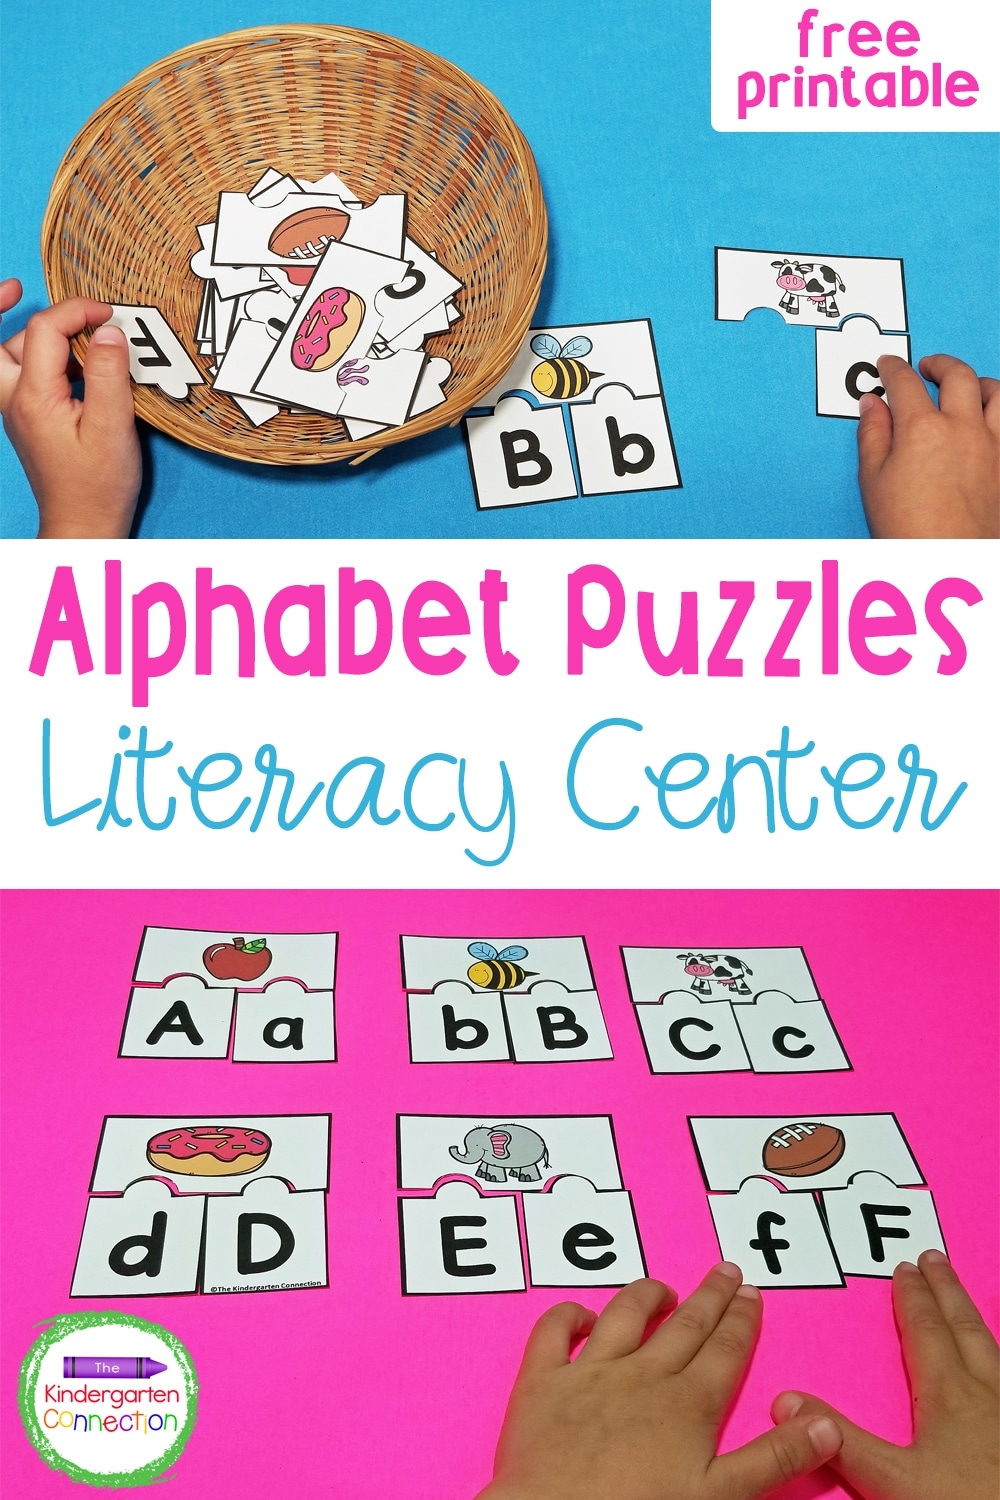 FREE Printable ABC Puzzles For Pre K Kindergarten - Free Printable Alphabet Puzzles